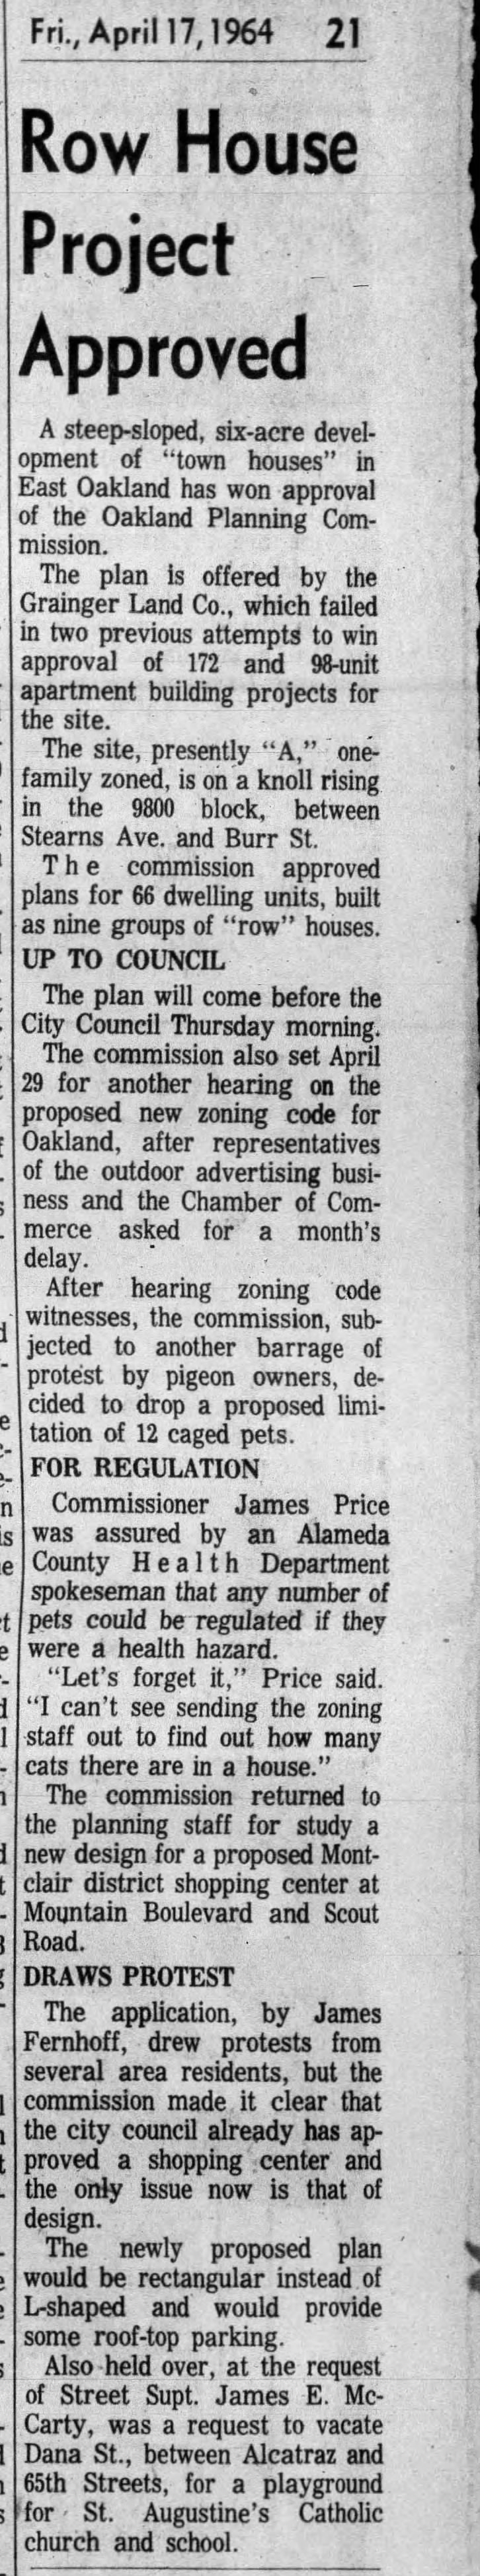 Row House Project Approved Apr 17, 1964